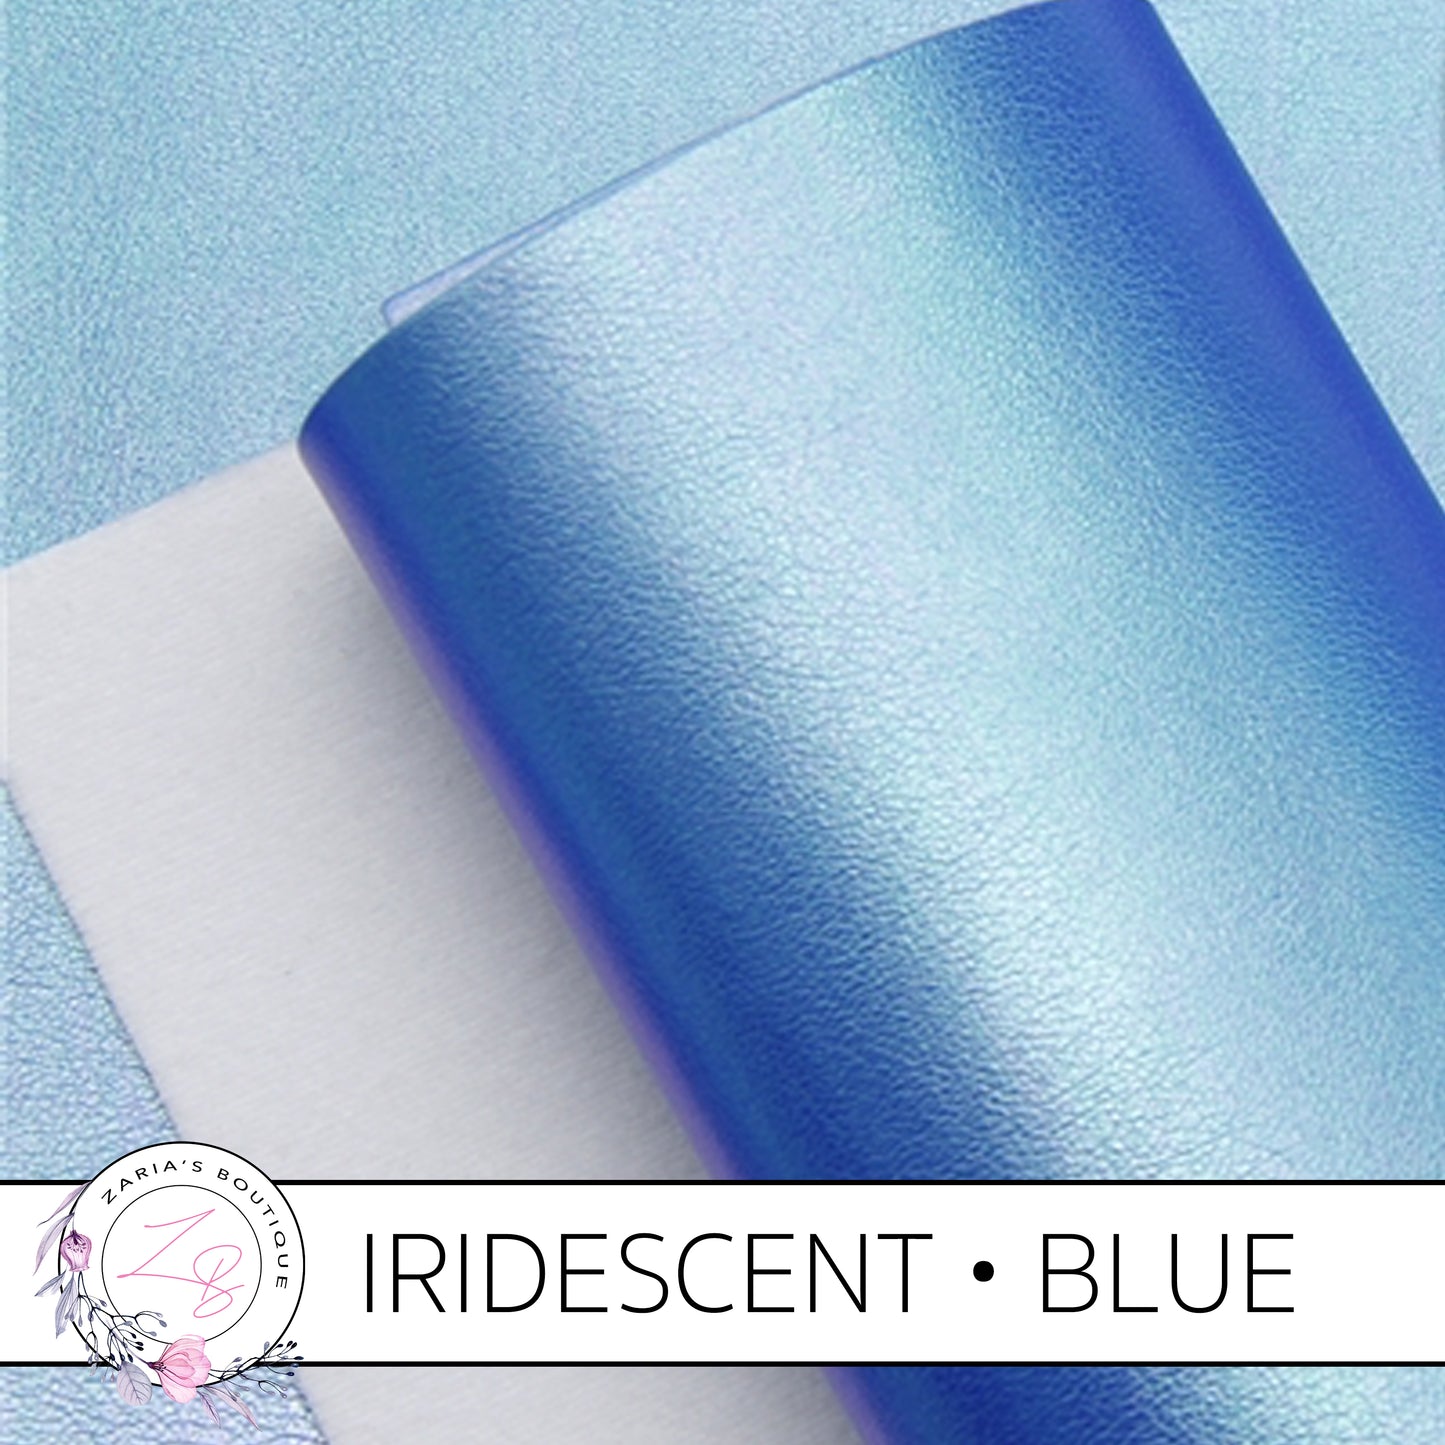 Iridescent Faux Leather ⋅ Blue Pearl AB ⋅